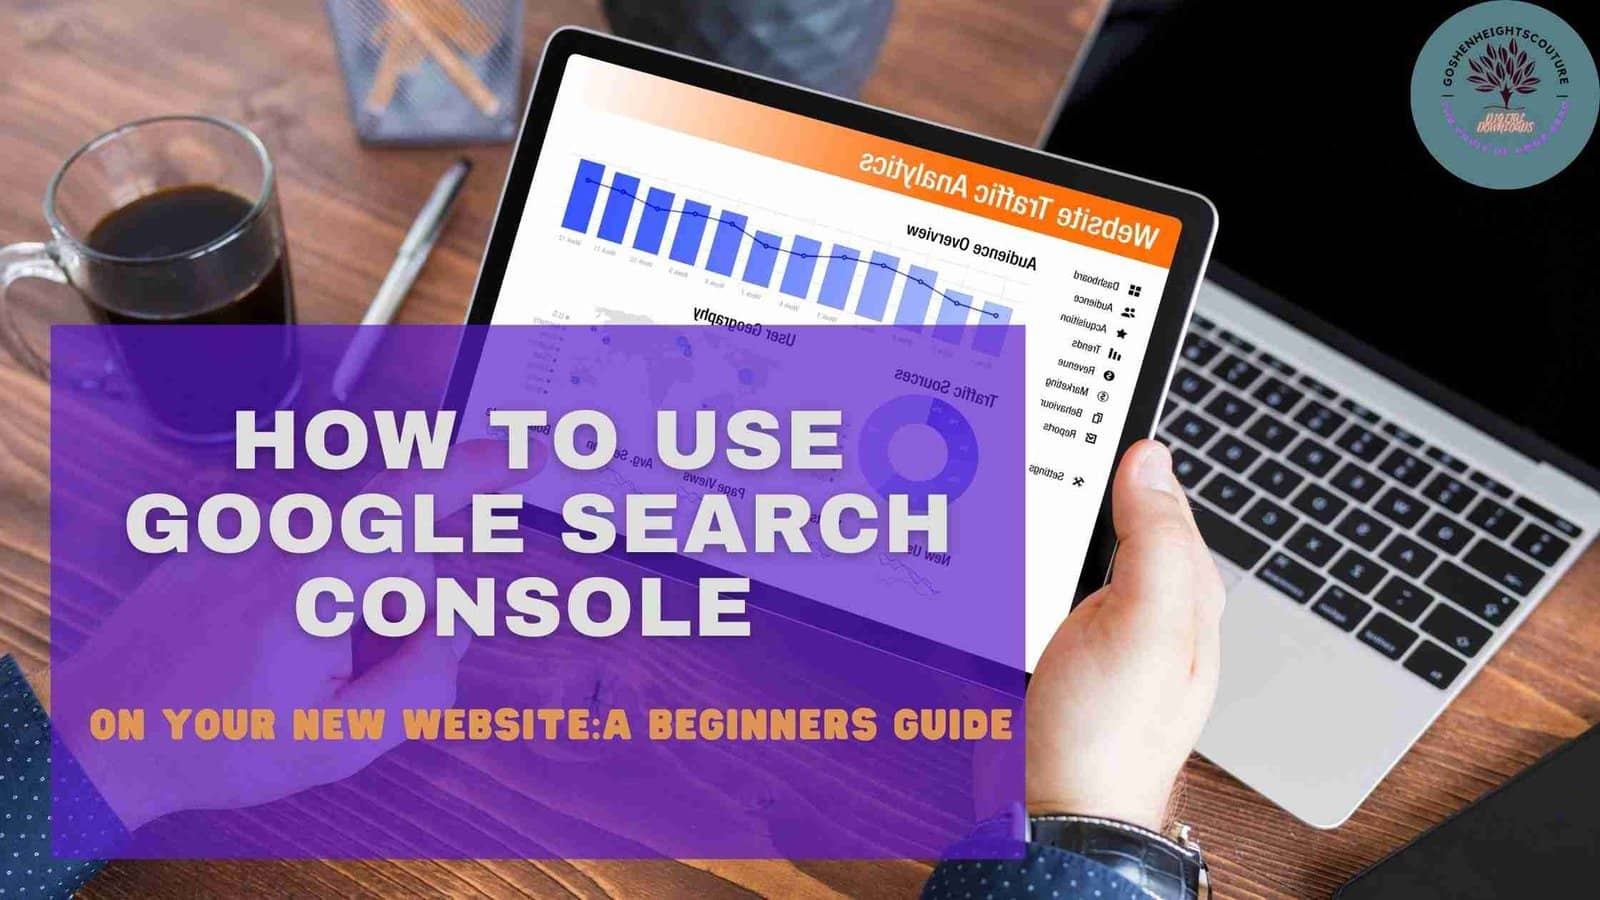 You are currently viewing “HOW TO USE GOOGLE SEARCH CONSOLE ON YOUR NEW WEBSITE”